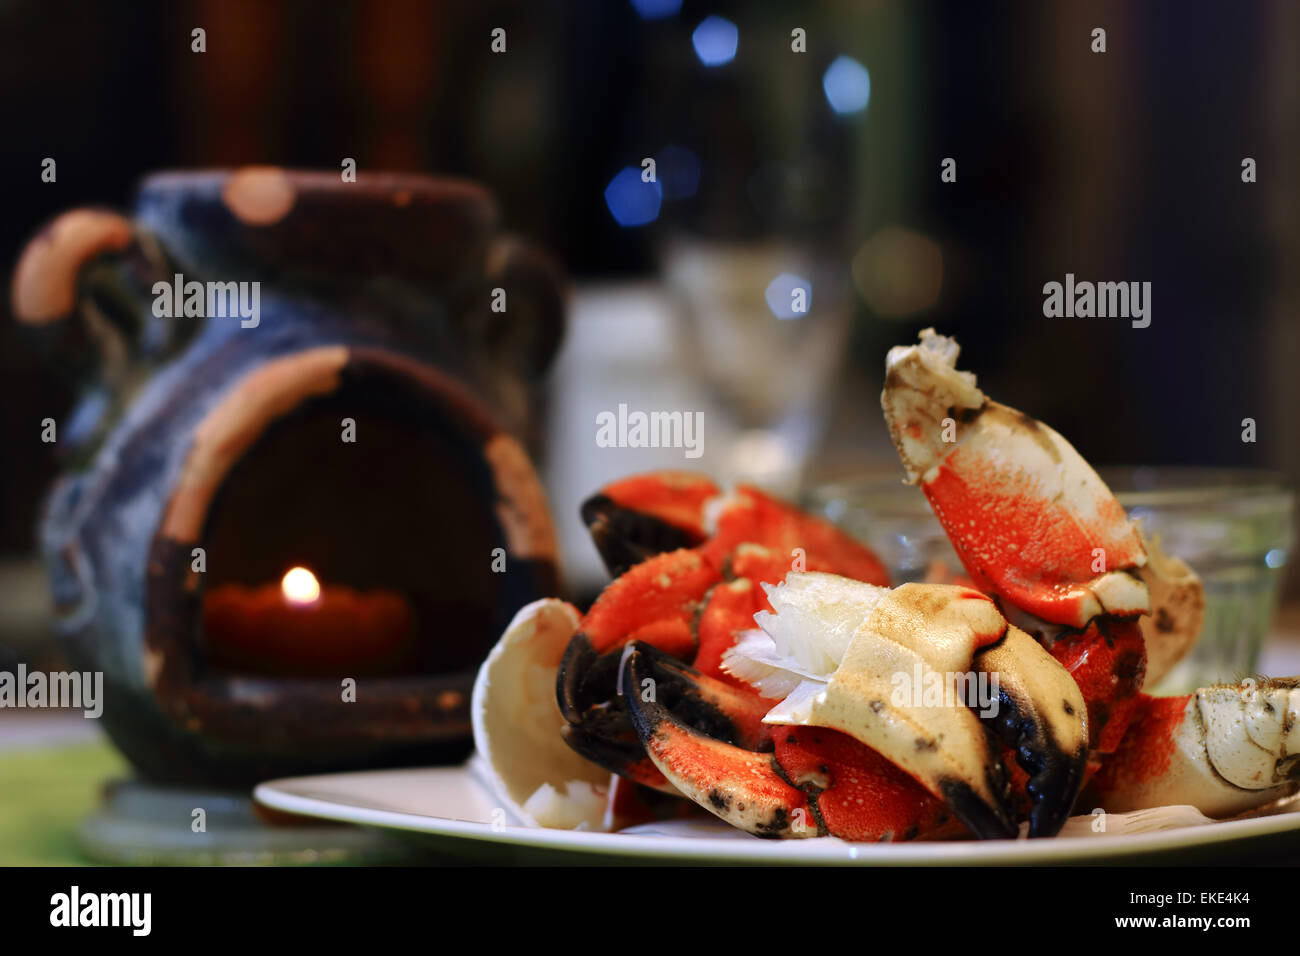 Jonah crab claws showing succulent meat on a plate, with candle light and defocsed flute glass in fine dining settings. Jonah cr Stock Photo